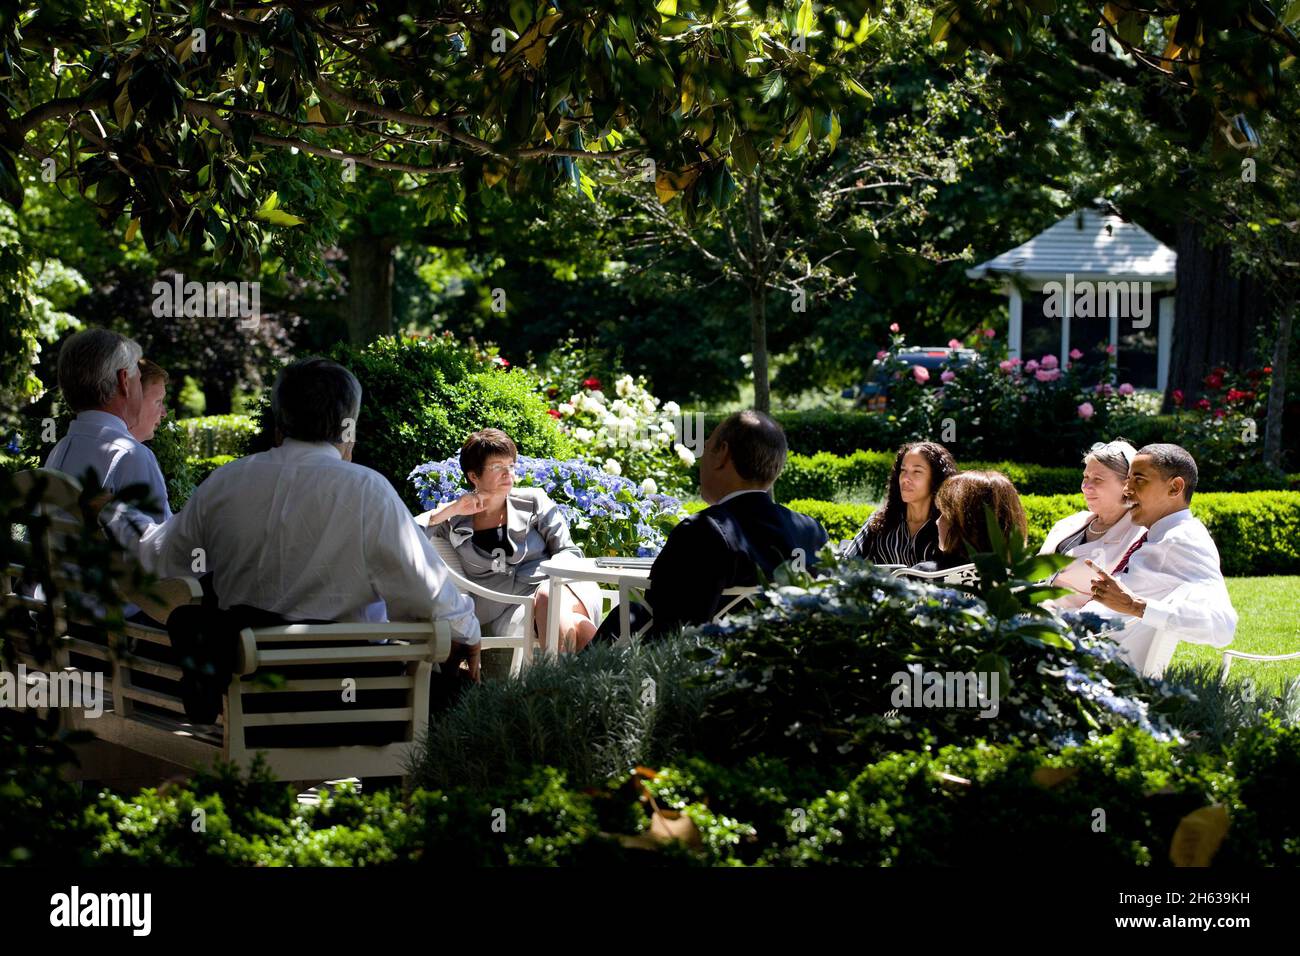 President Barack Obama and advisors sit around a table in the Rose Garden after moving their meeting outdoors on a warm spring day, May 20, 2009 Stock Photo